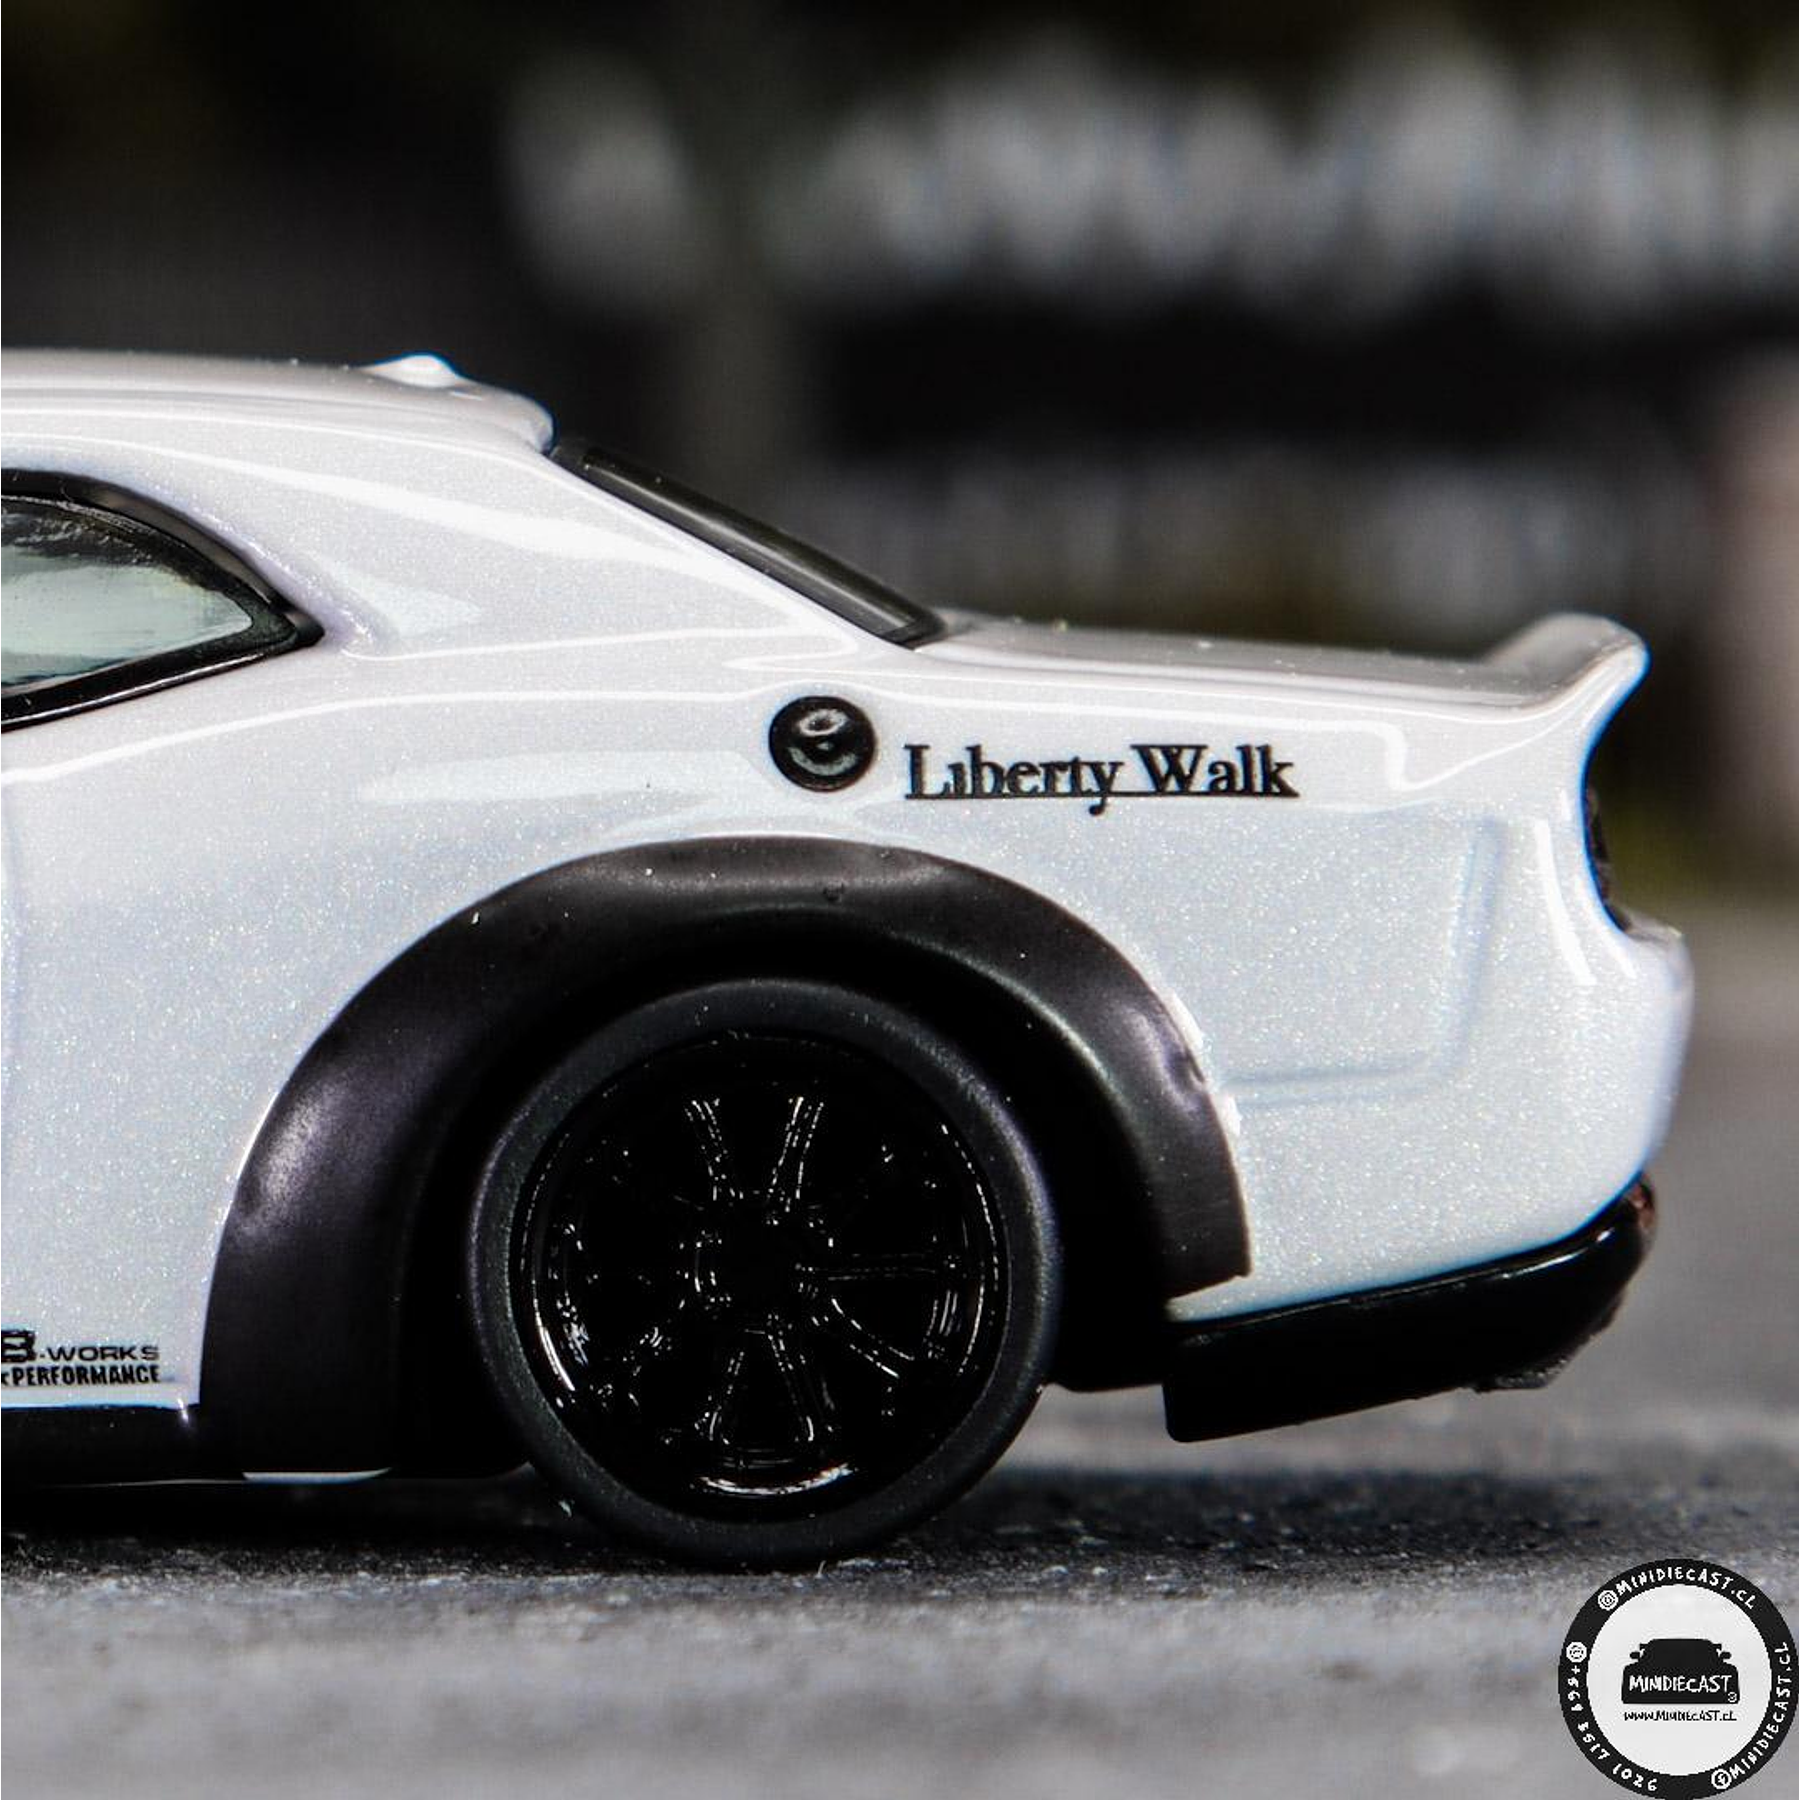 Tarmac Works 1:64 LB-WORKS Dodge Challenger SRT Hellcat White Lamley Special Edition